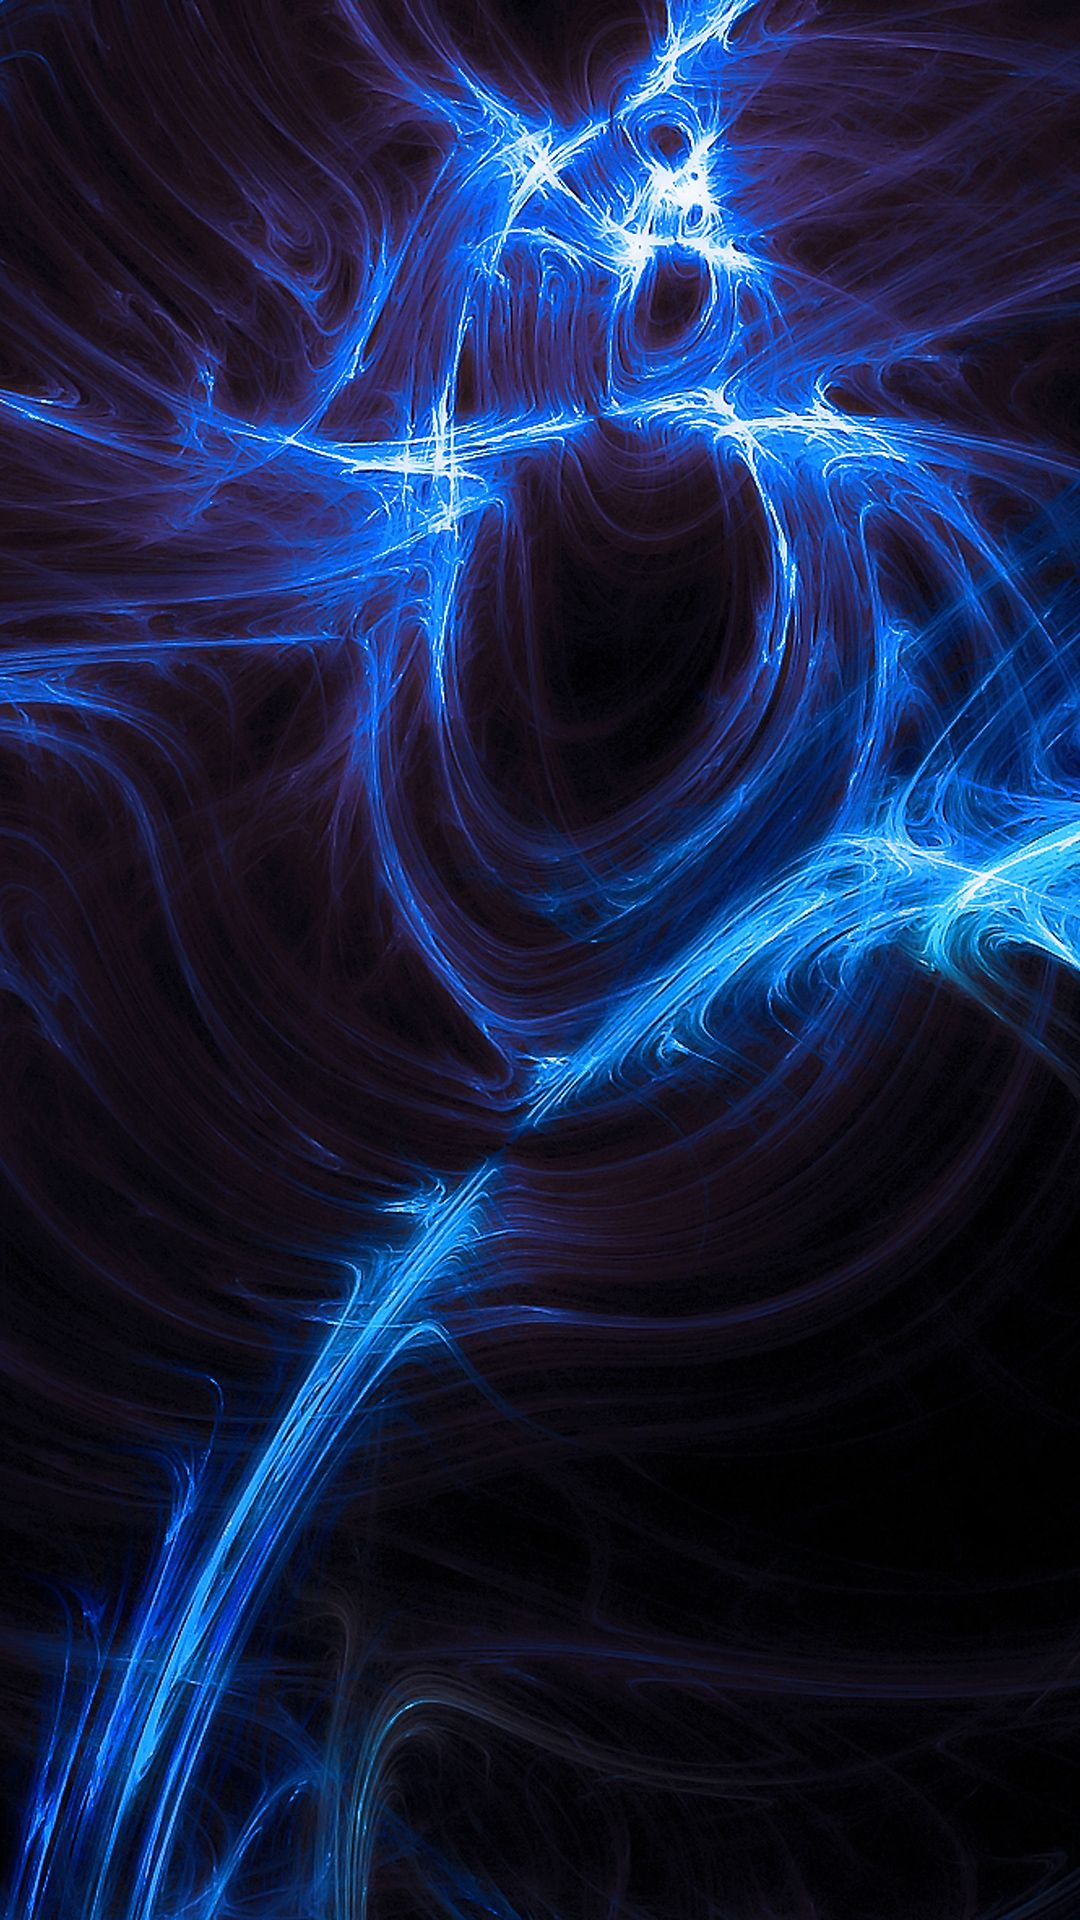 Abstract For Mobile Wallpapers - Wallpaper Cave